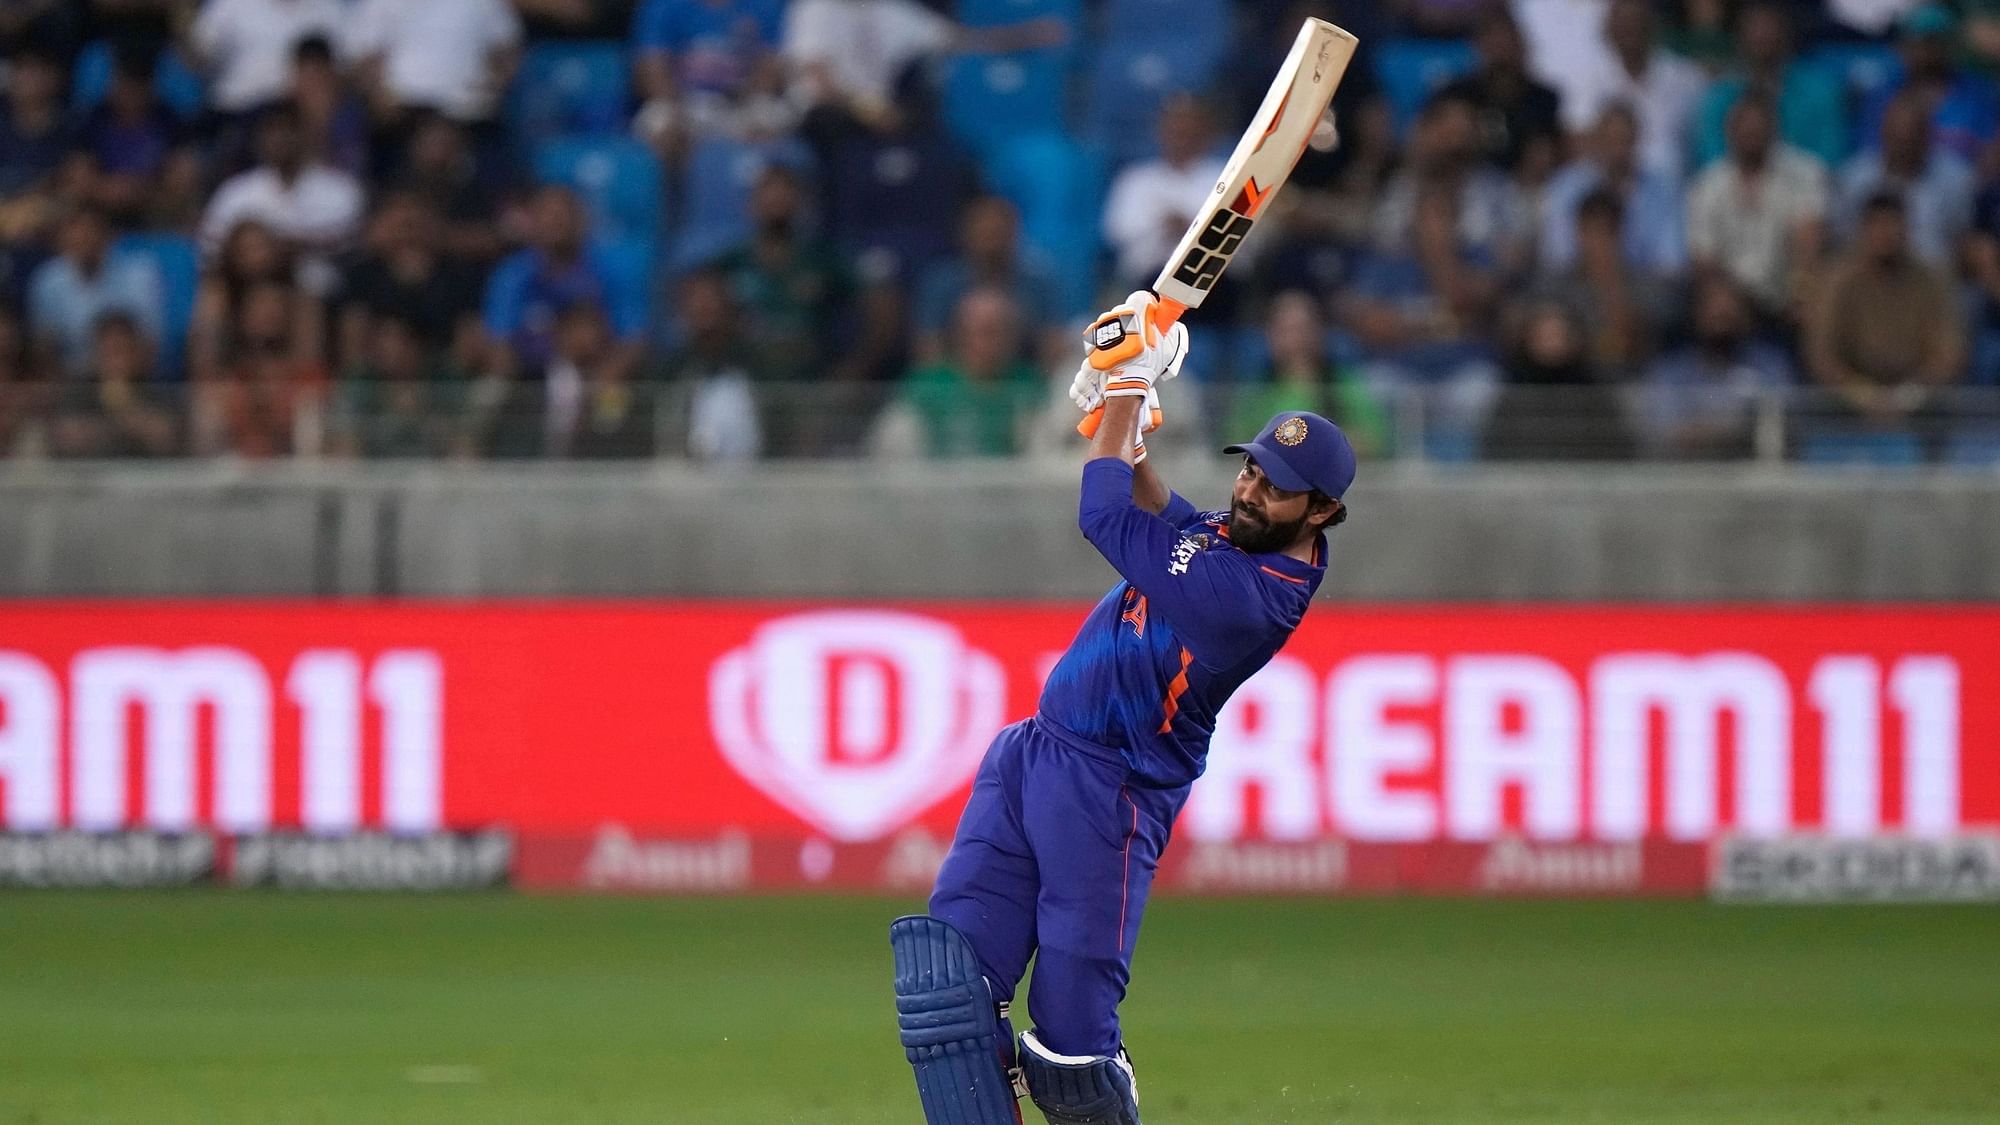 <div class="paragraphs"><p>India all-rounder Ravindra Jadeja was earlier ruled out of the Asia Cup Super 4 round due to a knee injury.&nbsp;</p></div>